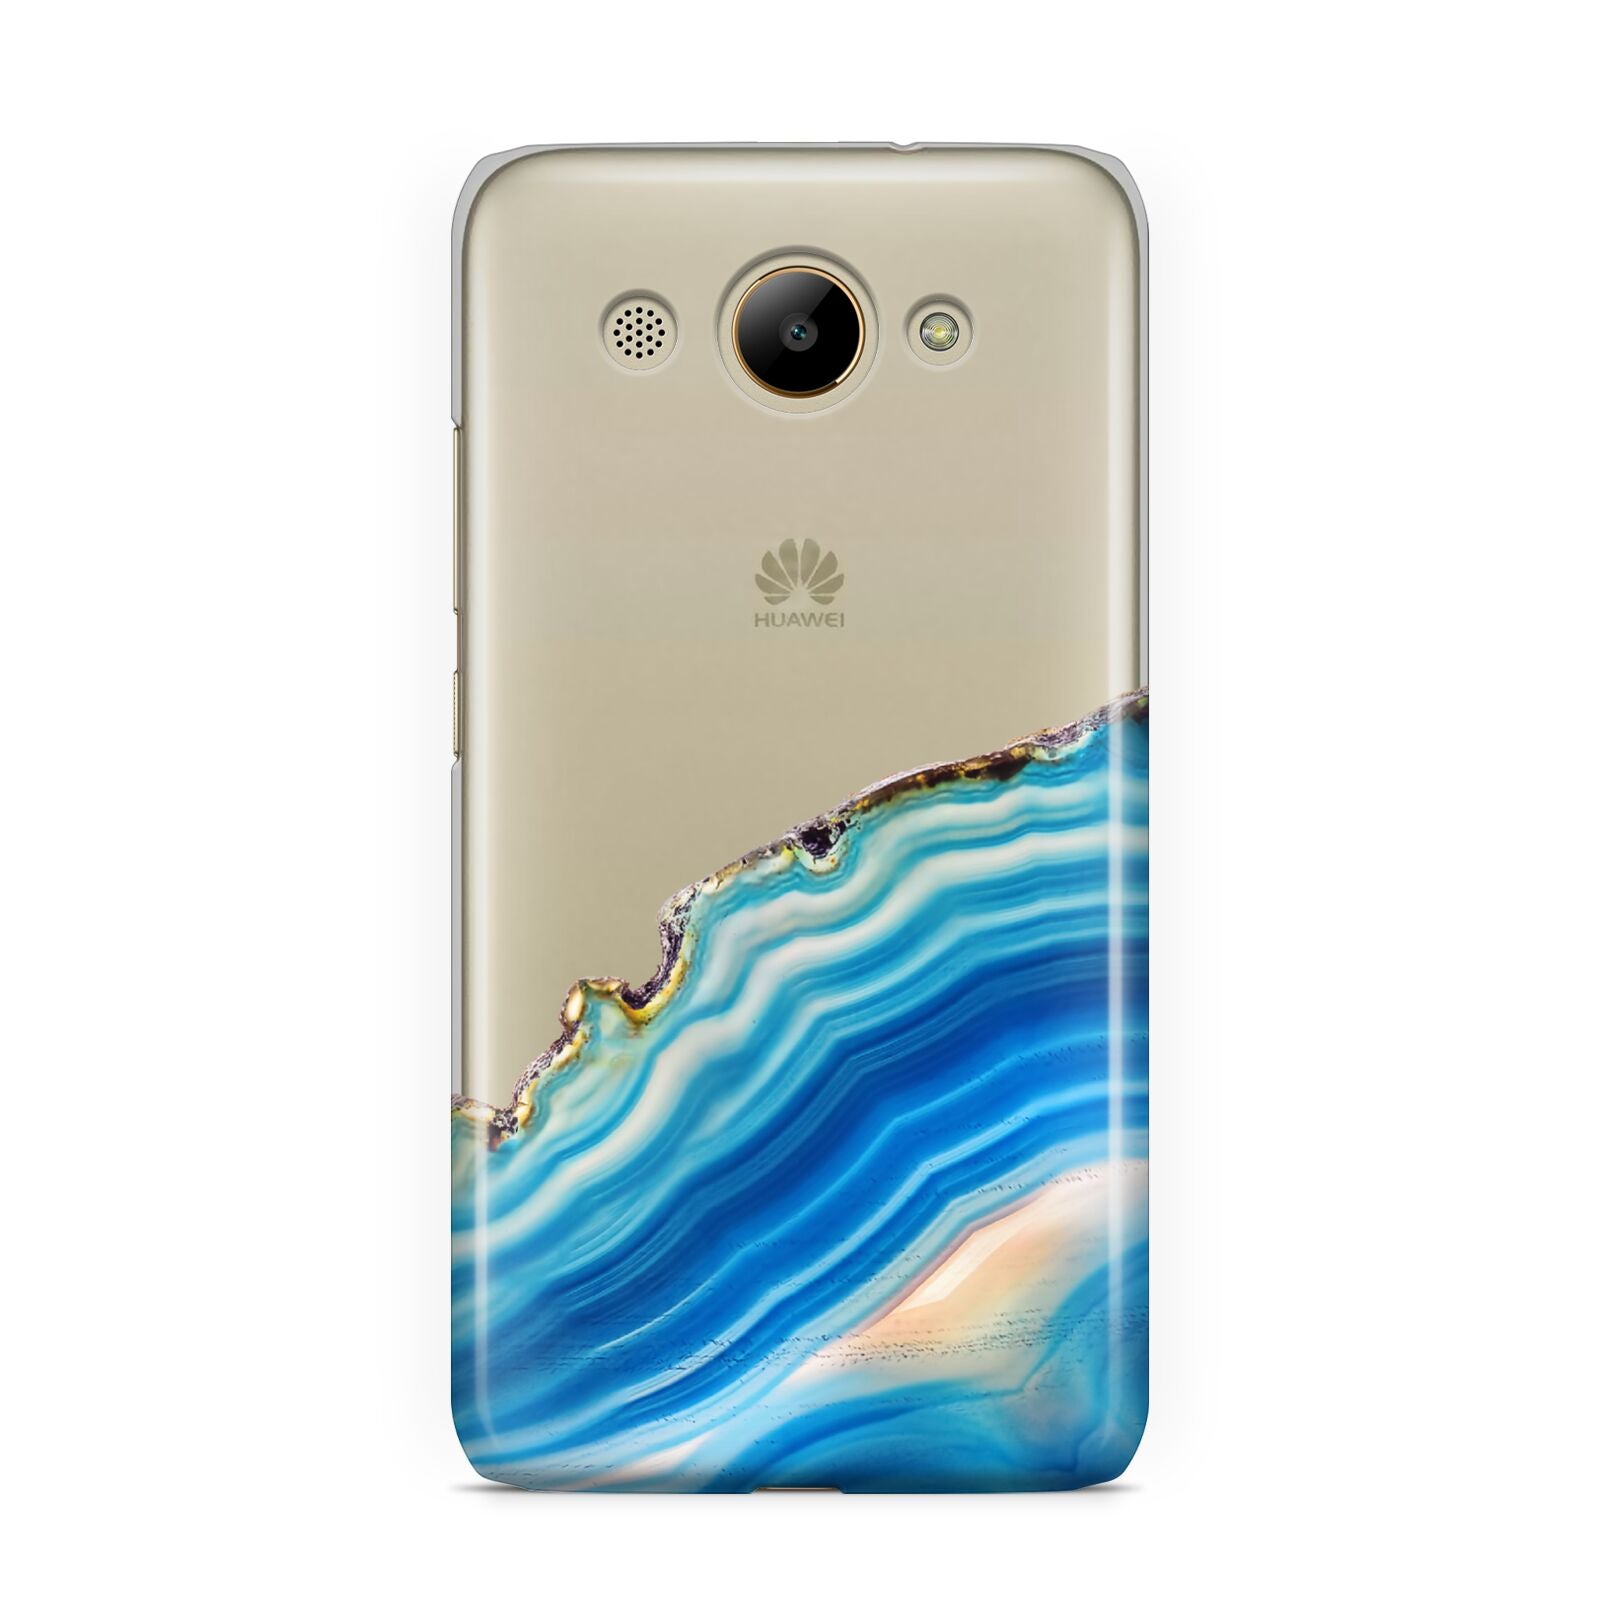 Agate Pale Blue and Bright Blue Huawei Y3 2017